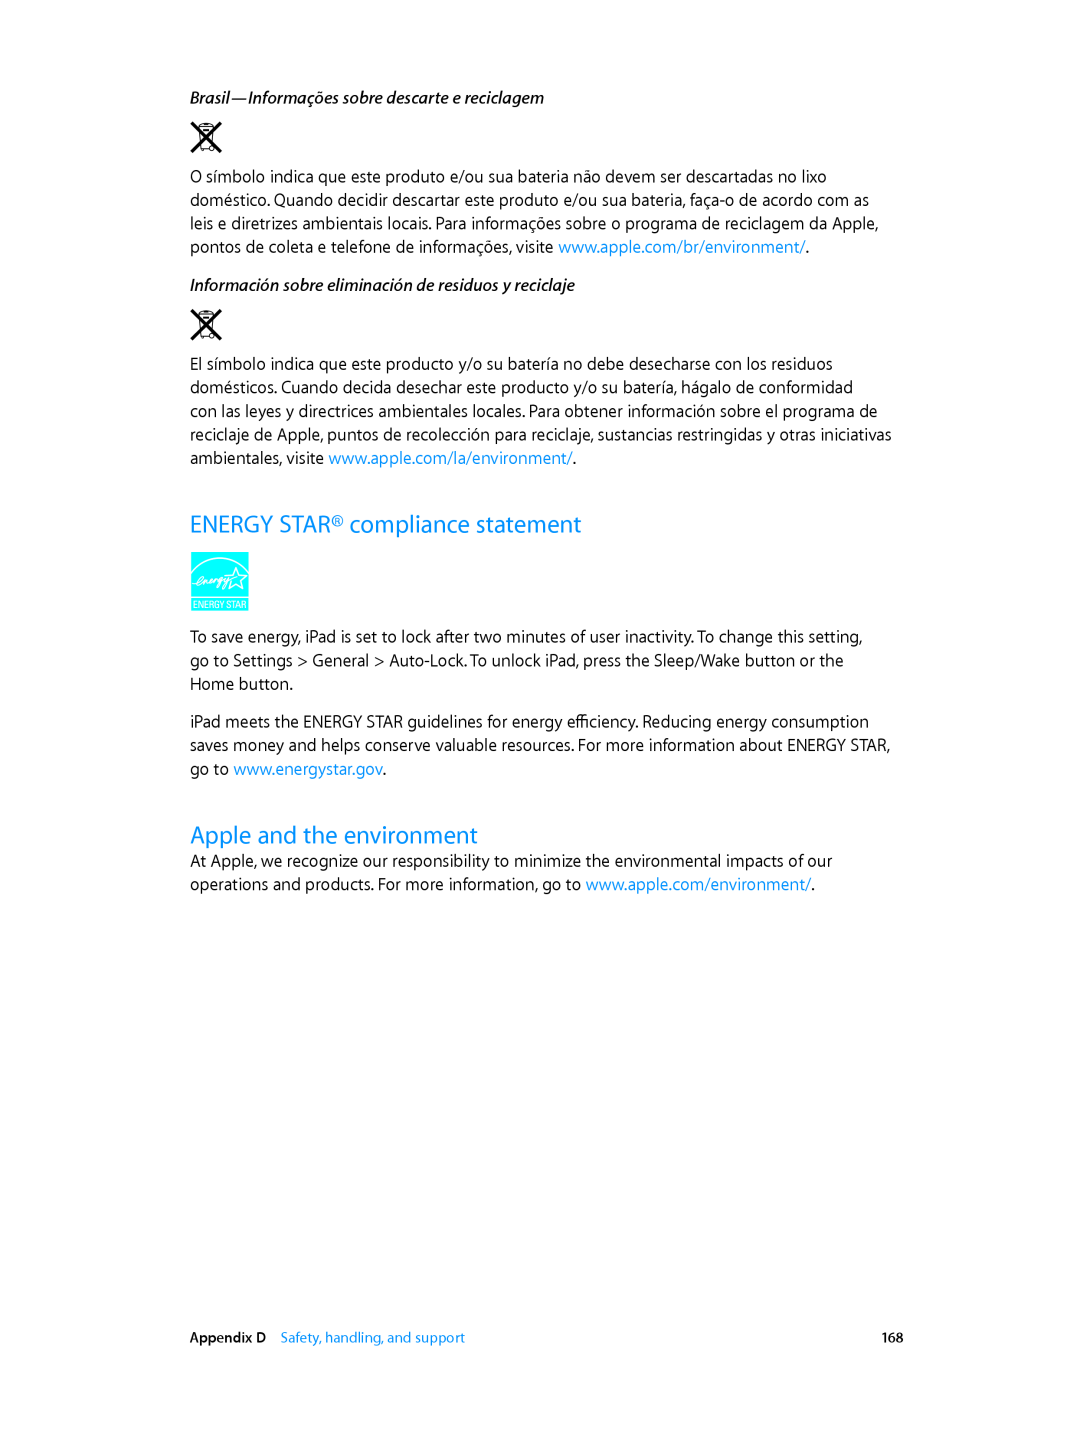 Apple MH312LL/A ENERGY STAR compliance statement, Apple and the environment, Appendix D Safety, handling, and support 